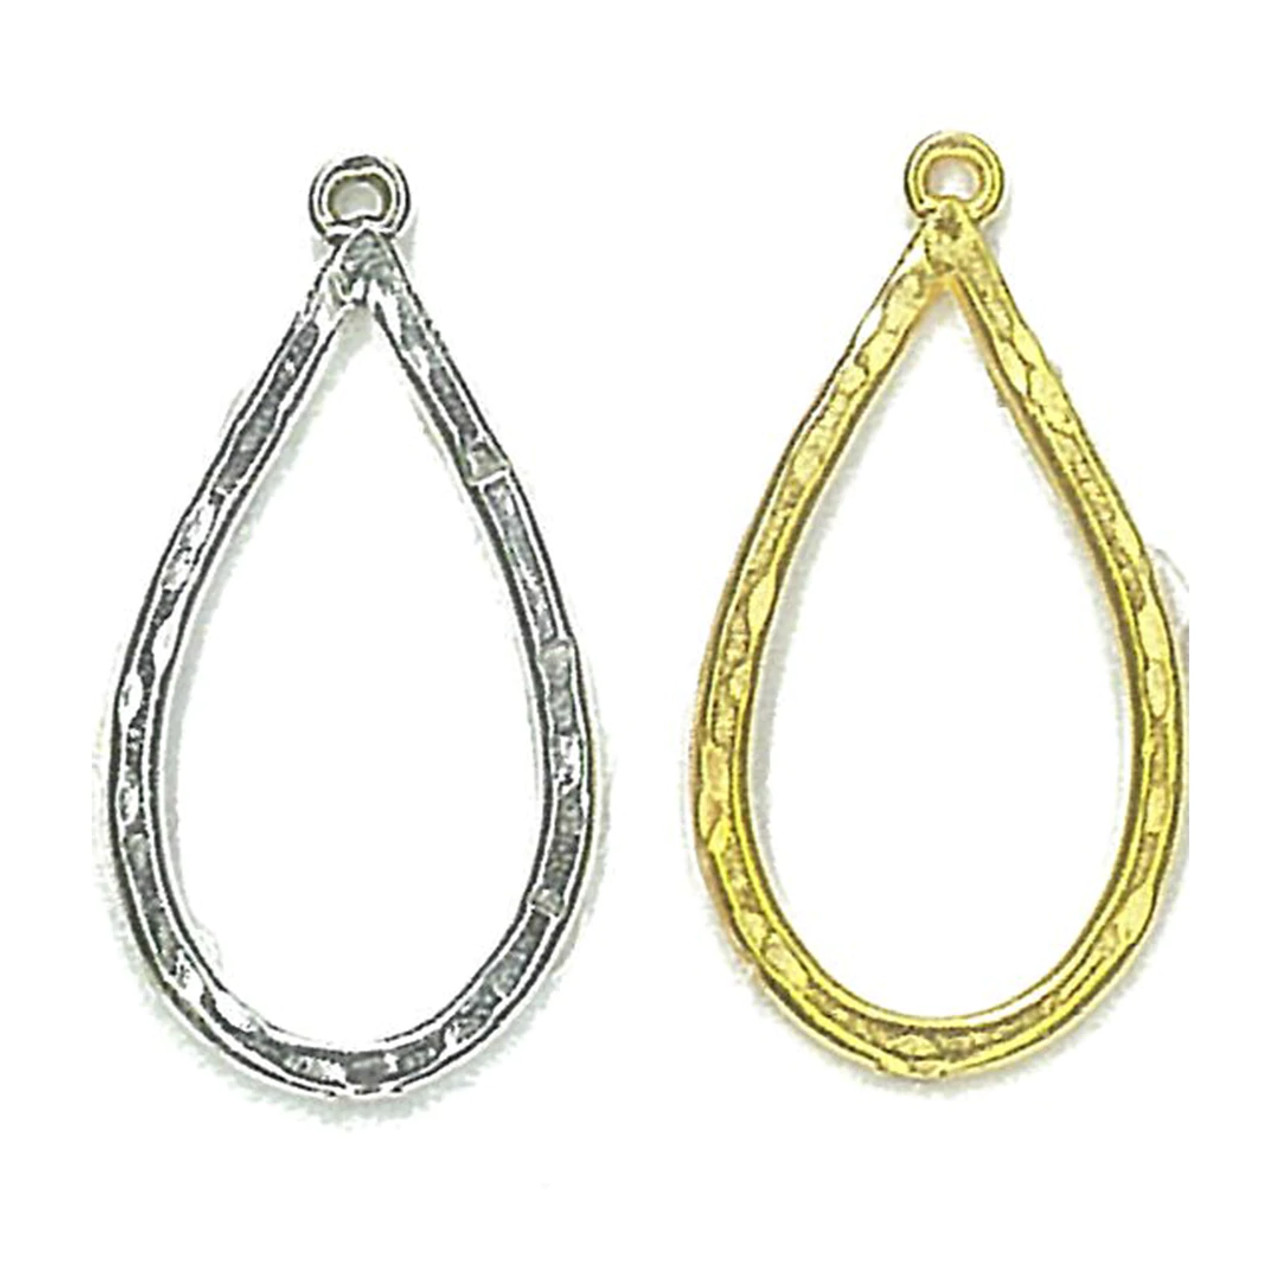 Silver textured 36X21mm open teardrop charm w/ ring (1 pair)